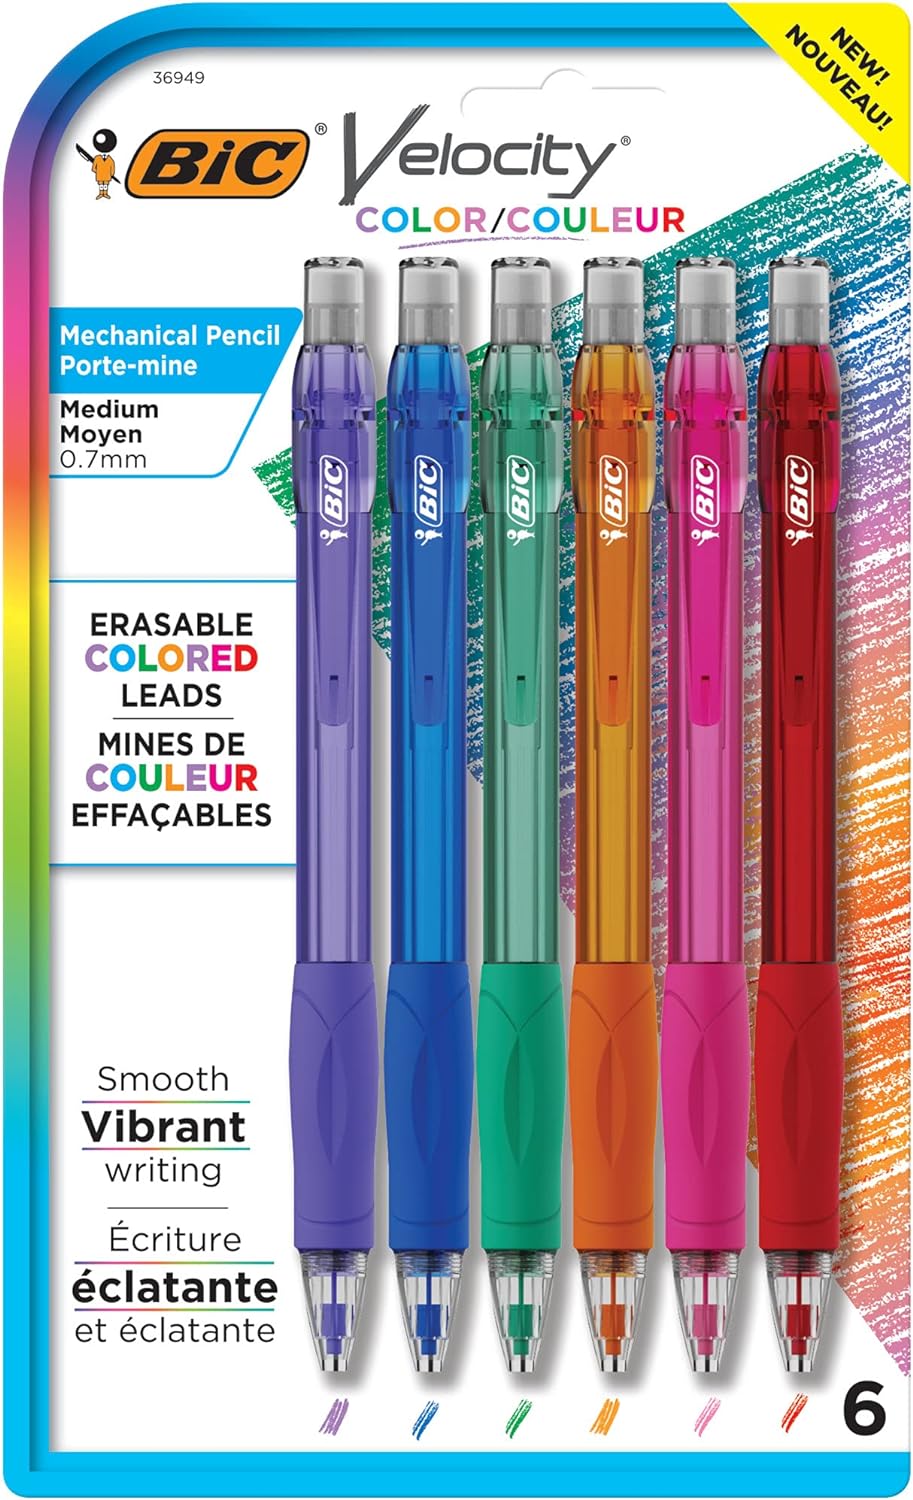 I had gotten this product to help me to organize my notetaking for my classes. The only thing is that where the lead in a normal 0.7 mechanical pencil does not break, these colored pencil leads break very easily. Sort of disappointed about that. The color on the other hand is awesome when it does hold up but that is very short-lived.